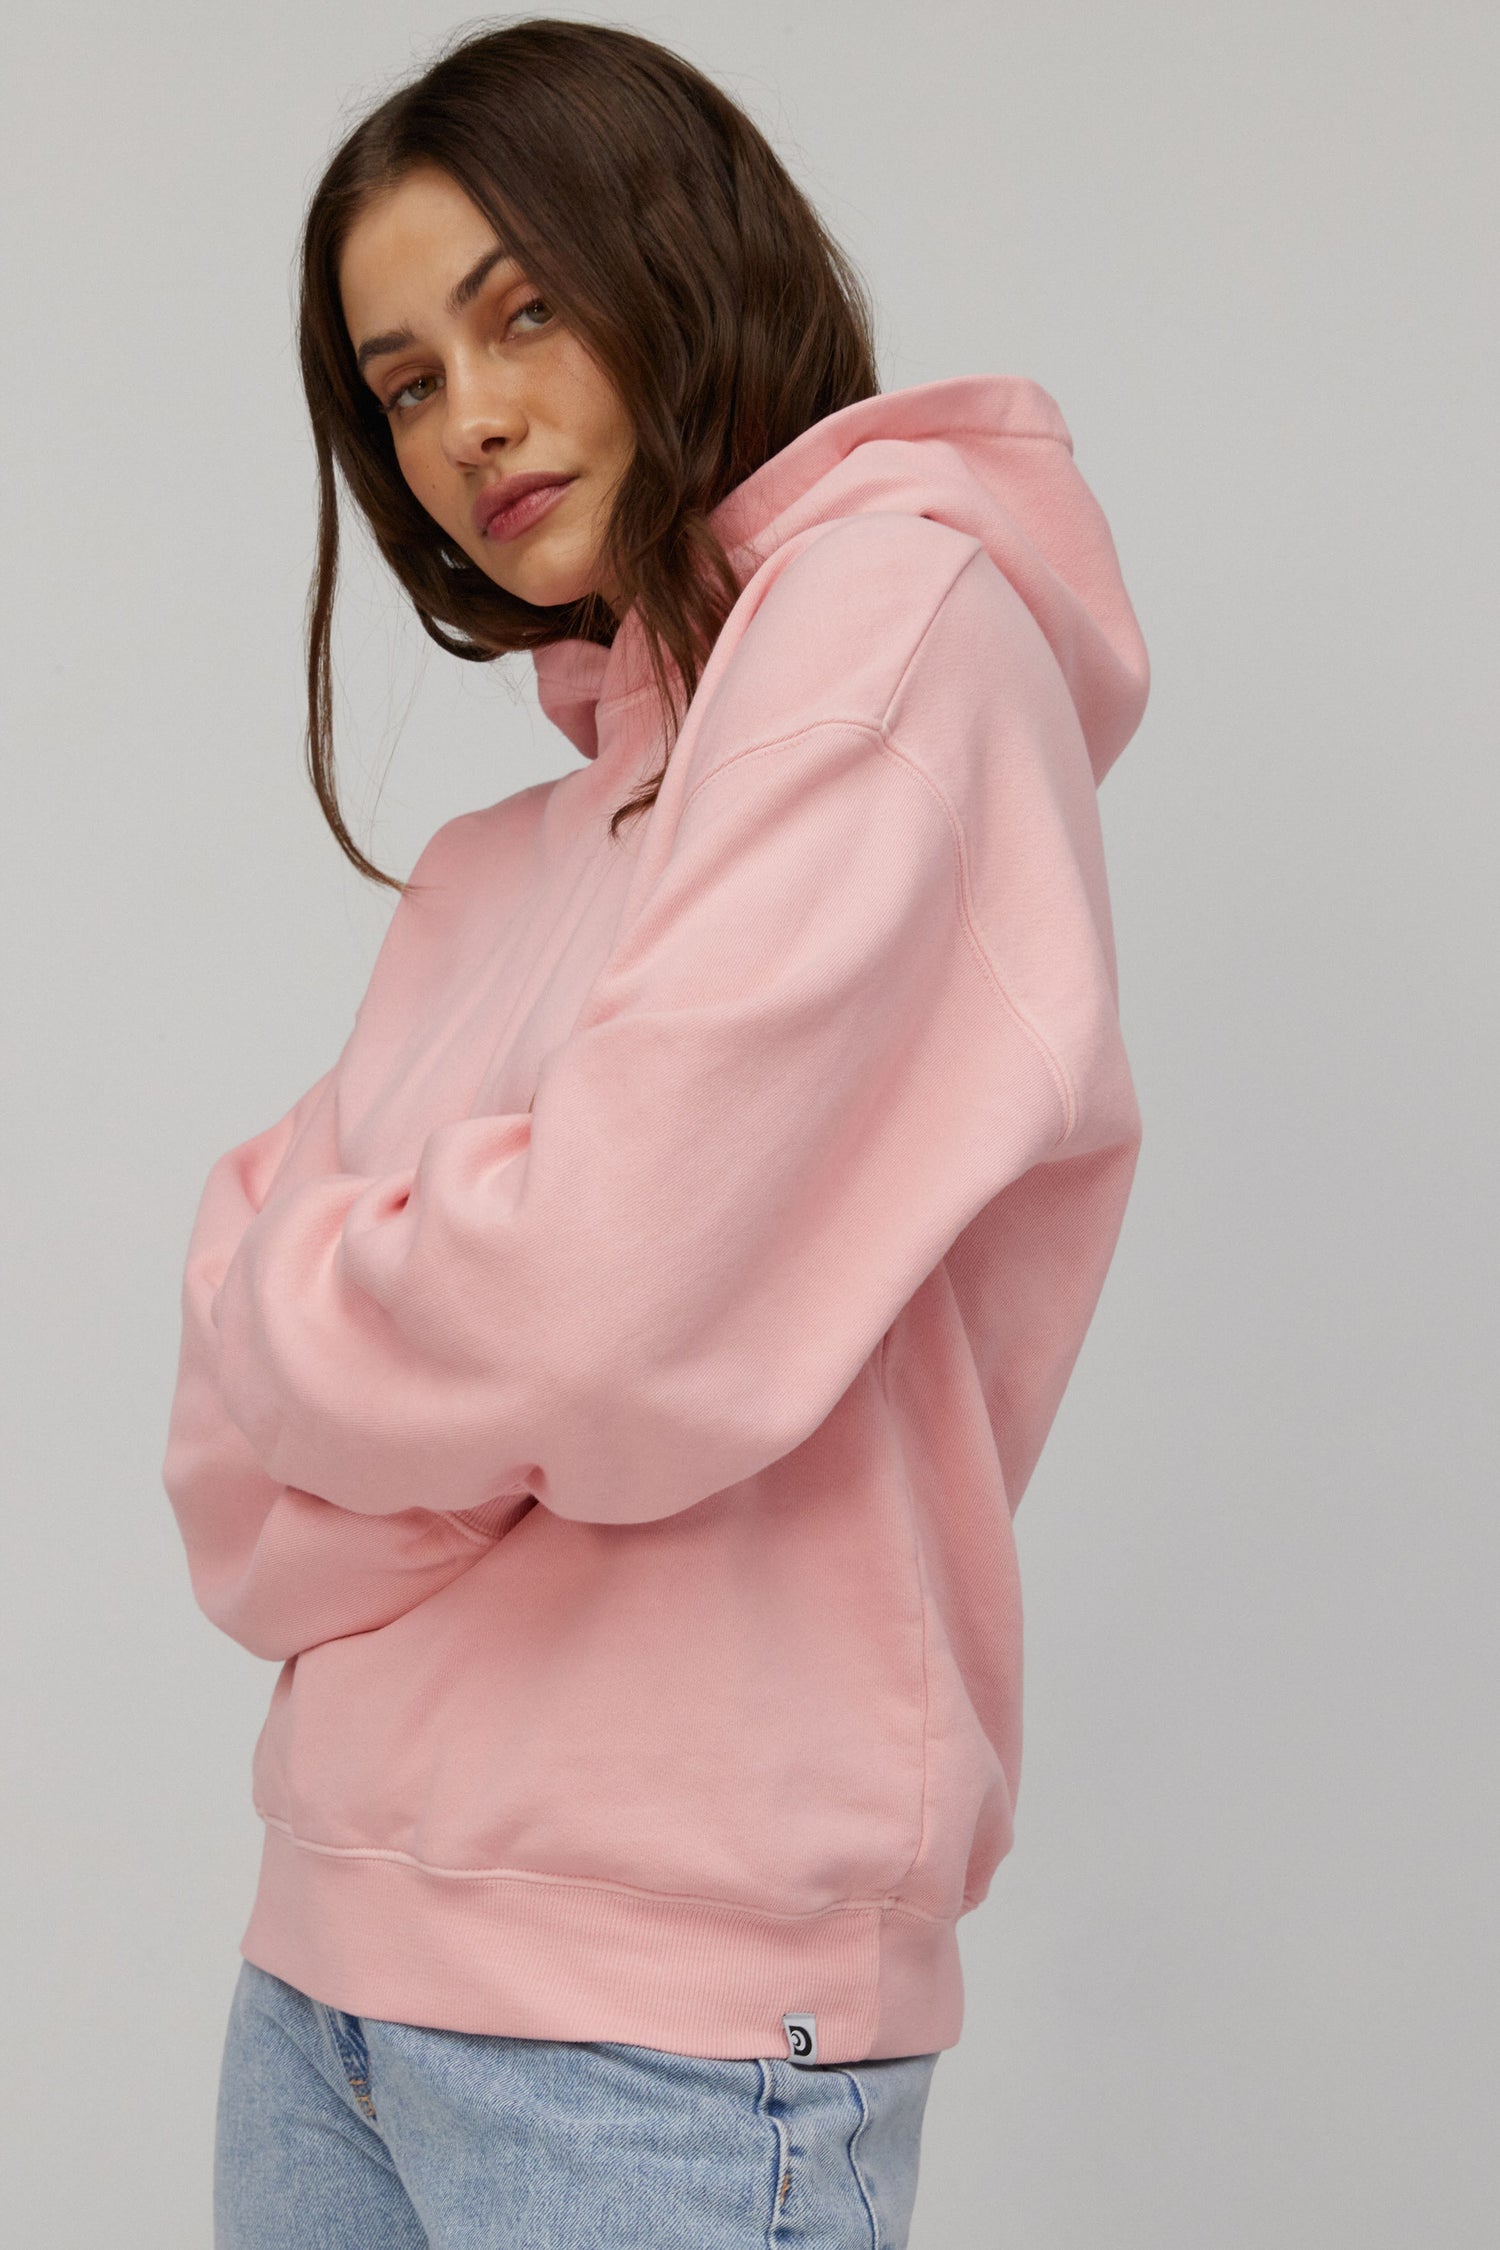 Dark-haired model featuring a pink-colored super soft and slightly oversized boyfriend hoodie